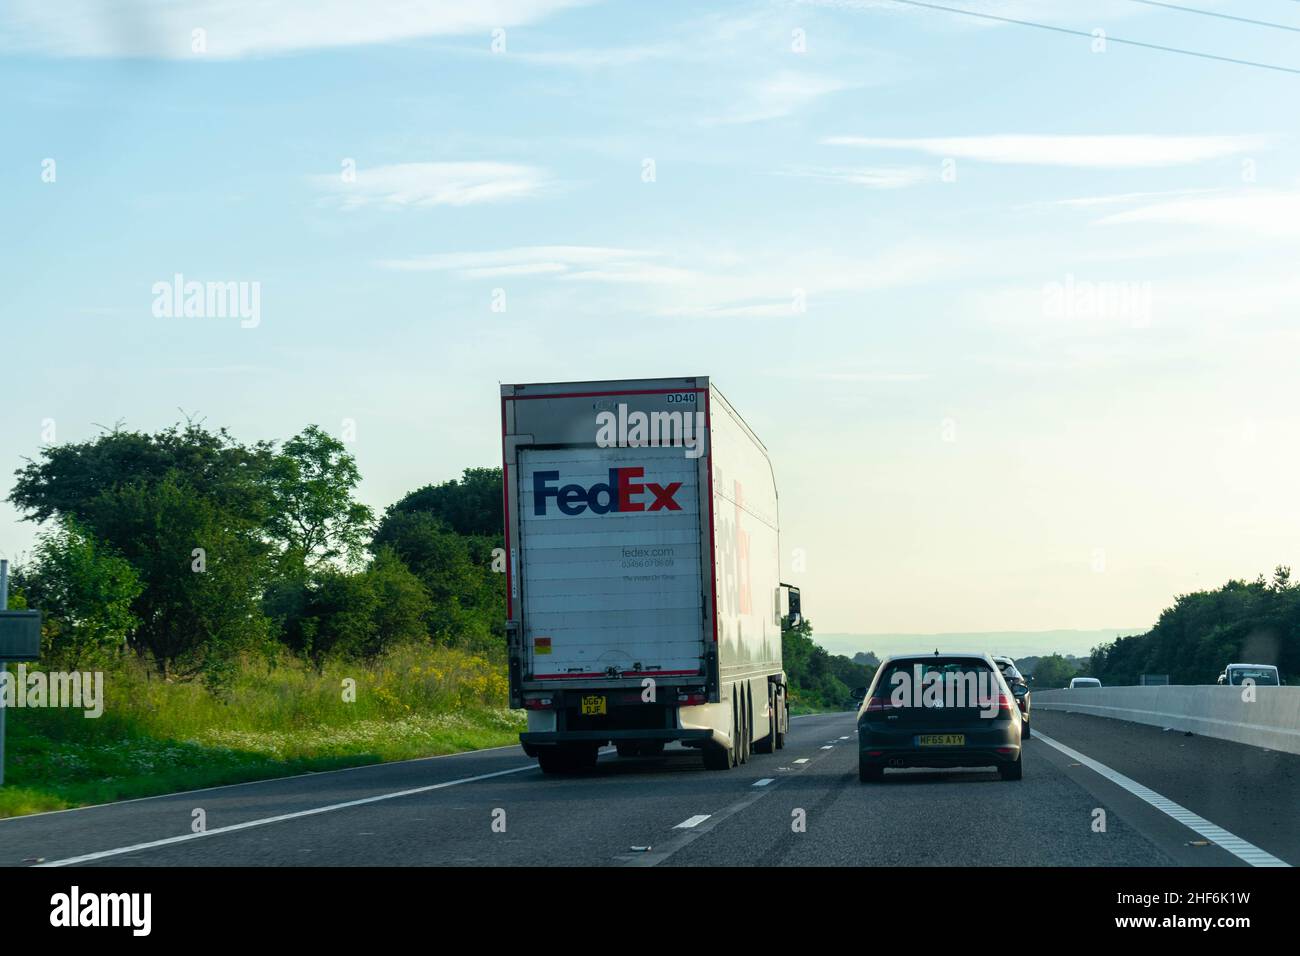 Durham, UK - 23rd August 2019: Fedex, Federal Express,lorry driving down a British motorway. American multinational courier delivery services. Deliver Stock Photo